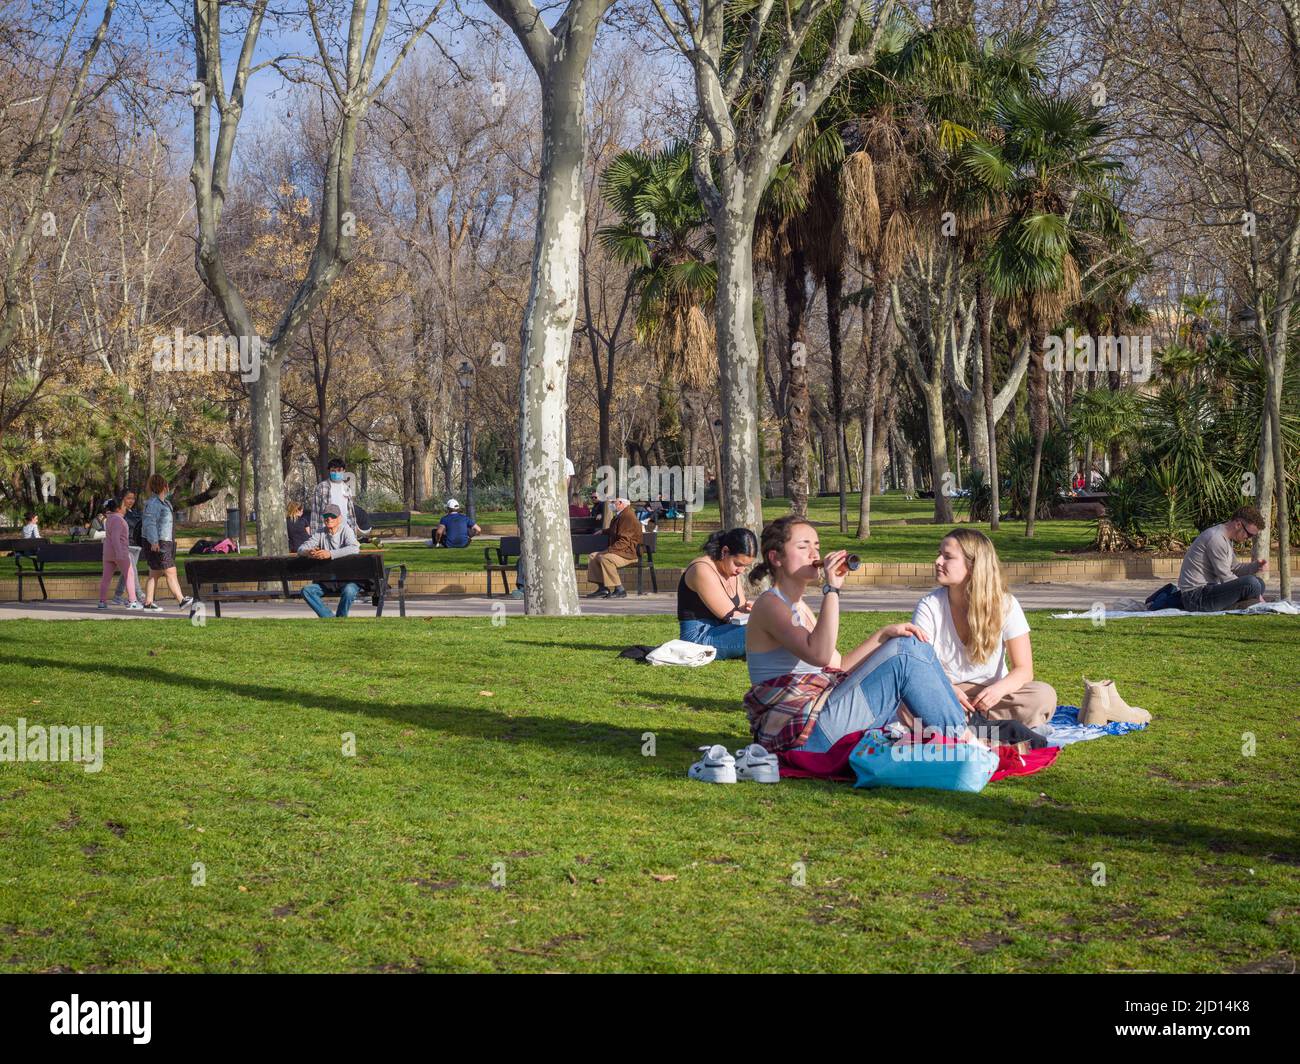 People enjoying the nice weather in the park Madrid, Spain Stock Photo